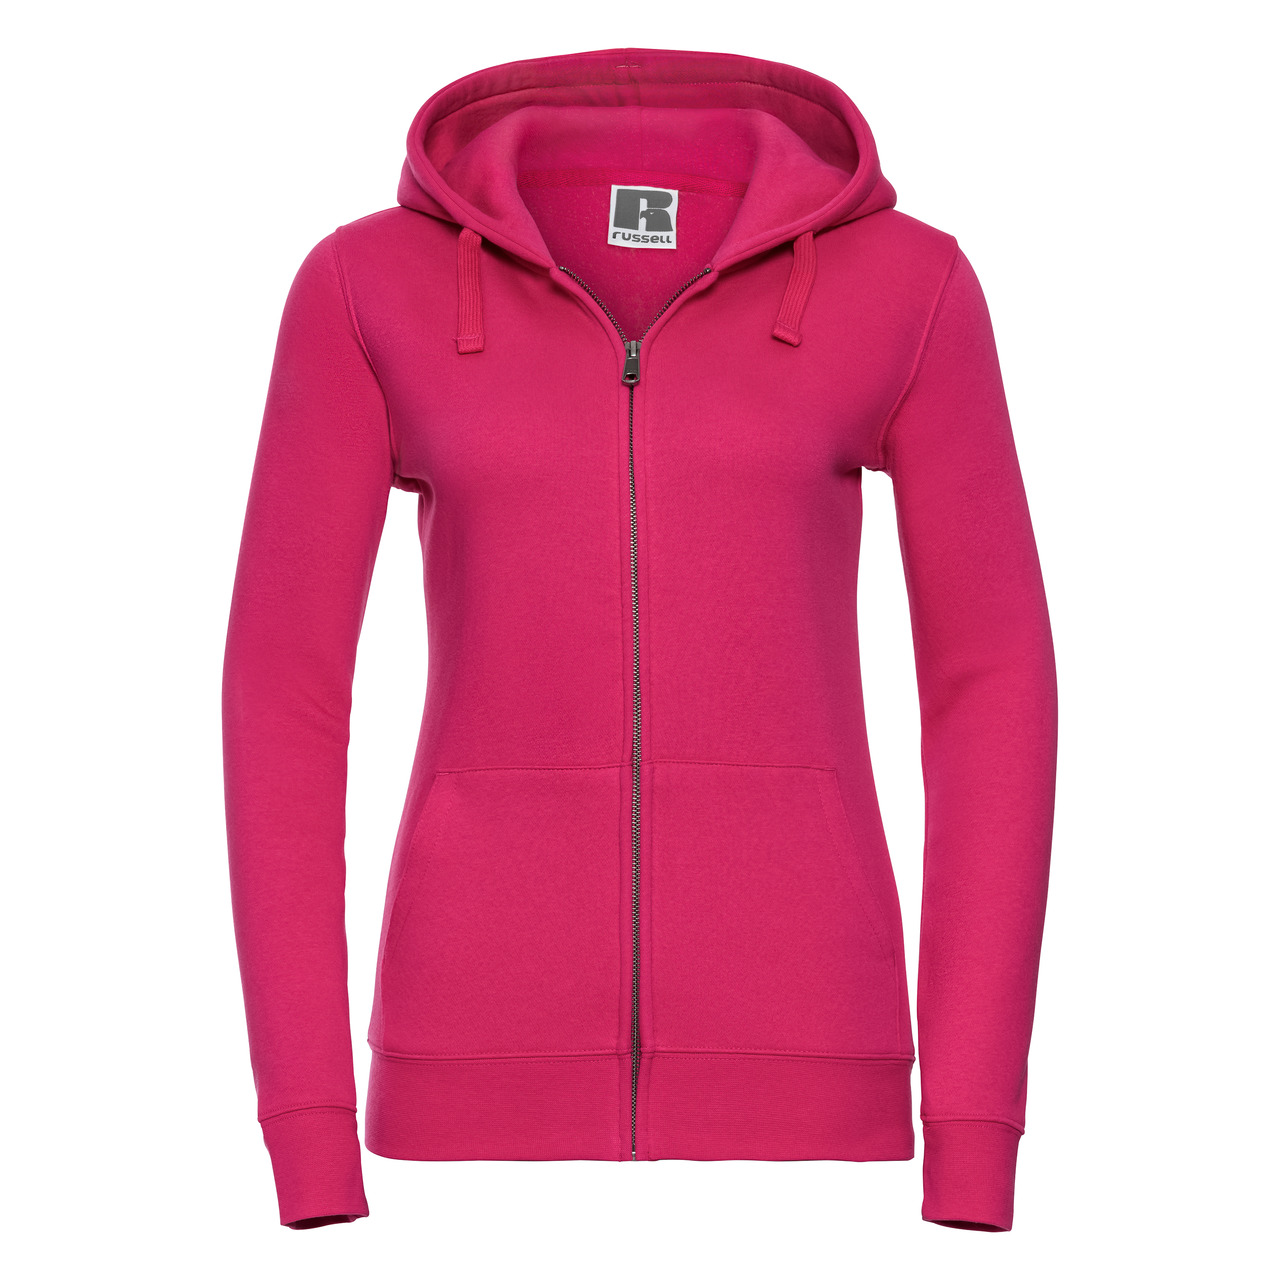 LADIES AUTHENTIC ZIPPED HOOD JACKET | Russell